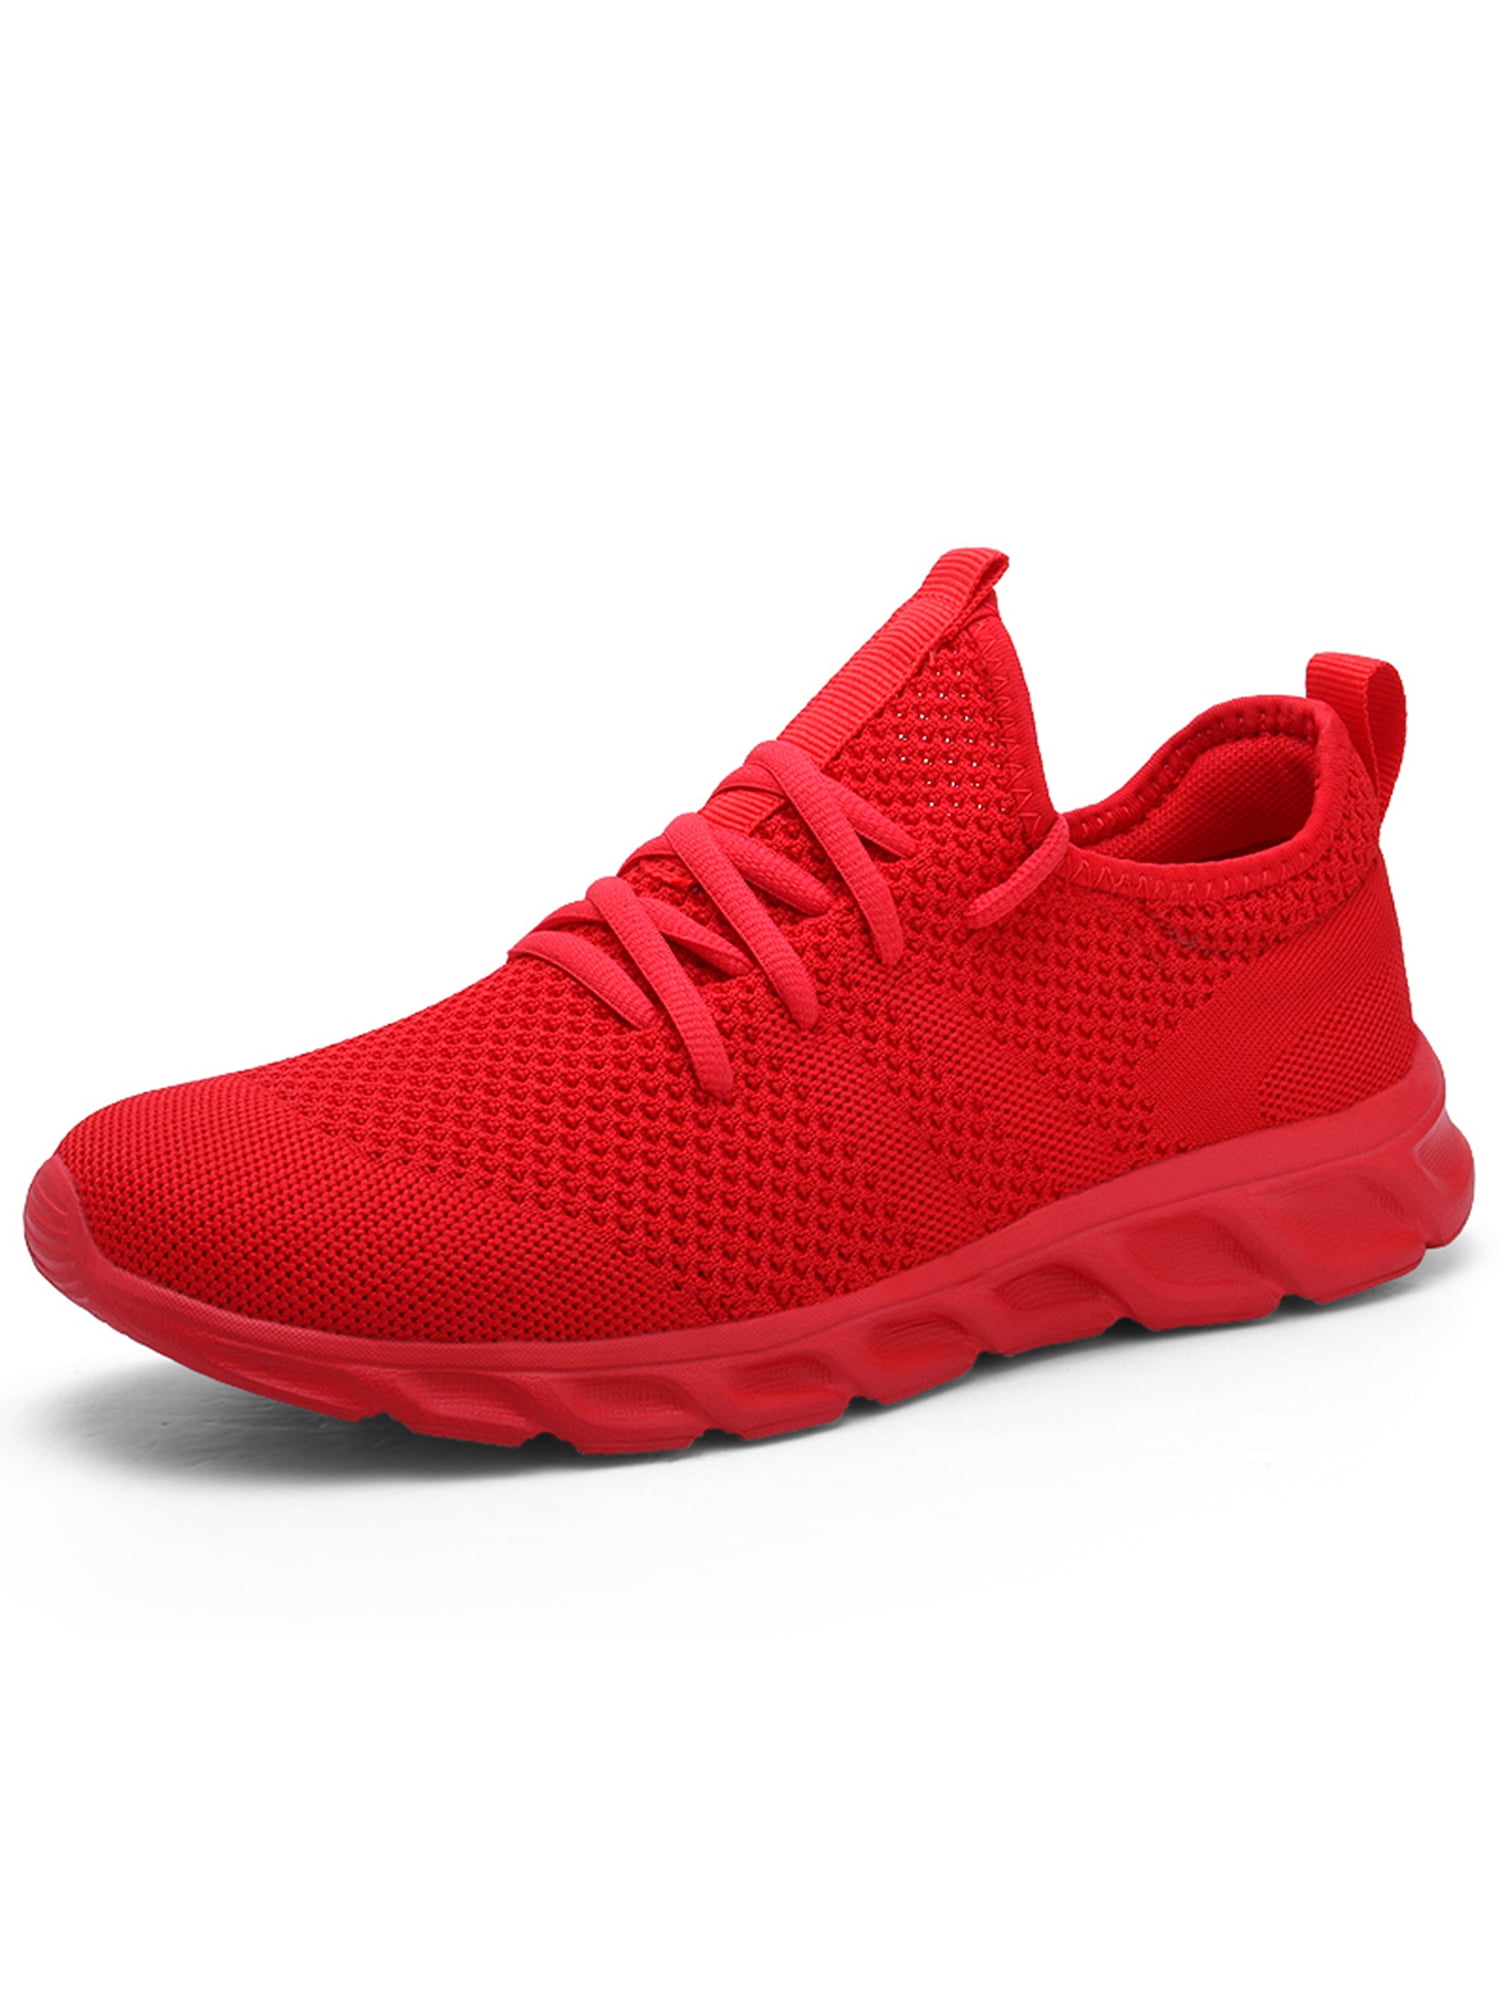 adidas Ultrabounce Shoes - Red | adidas Philippines-totobed.com.vn